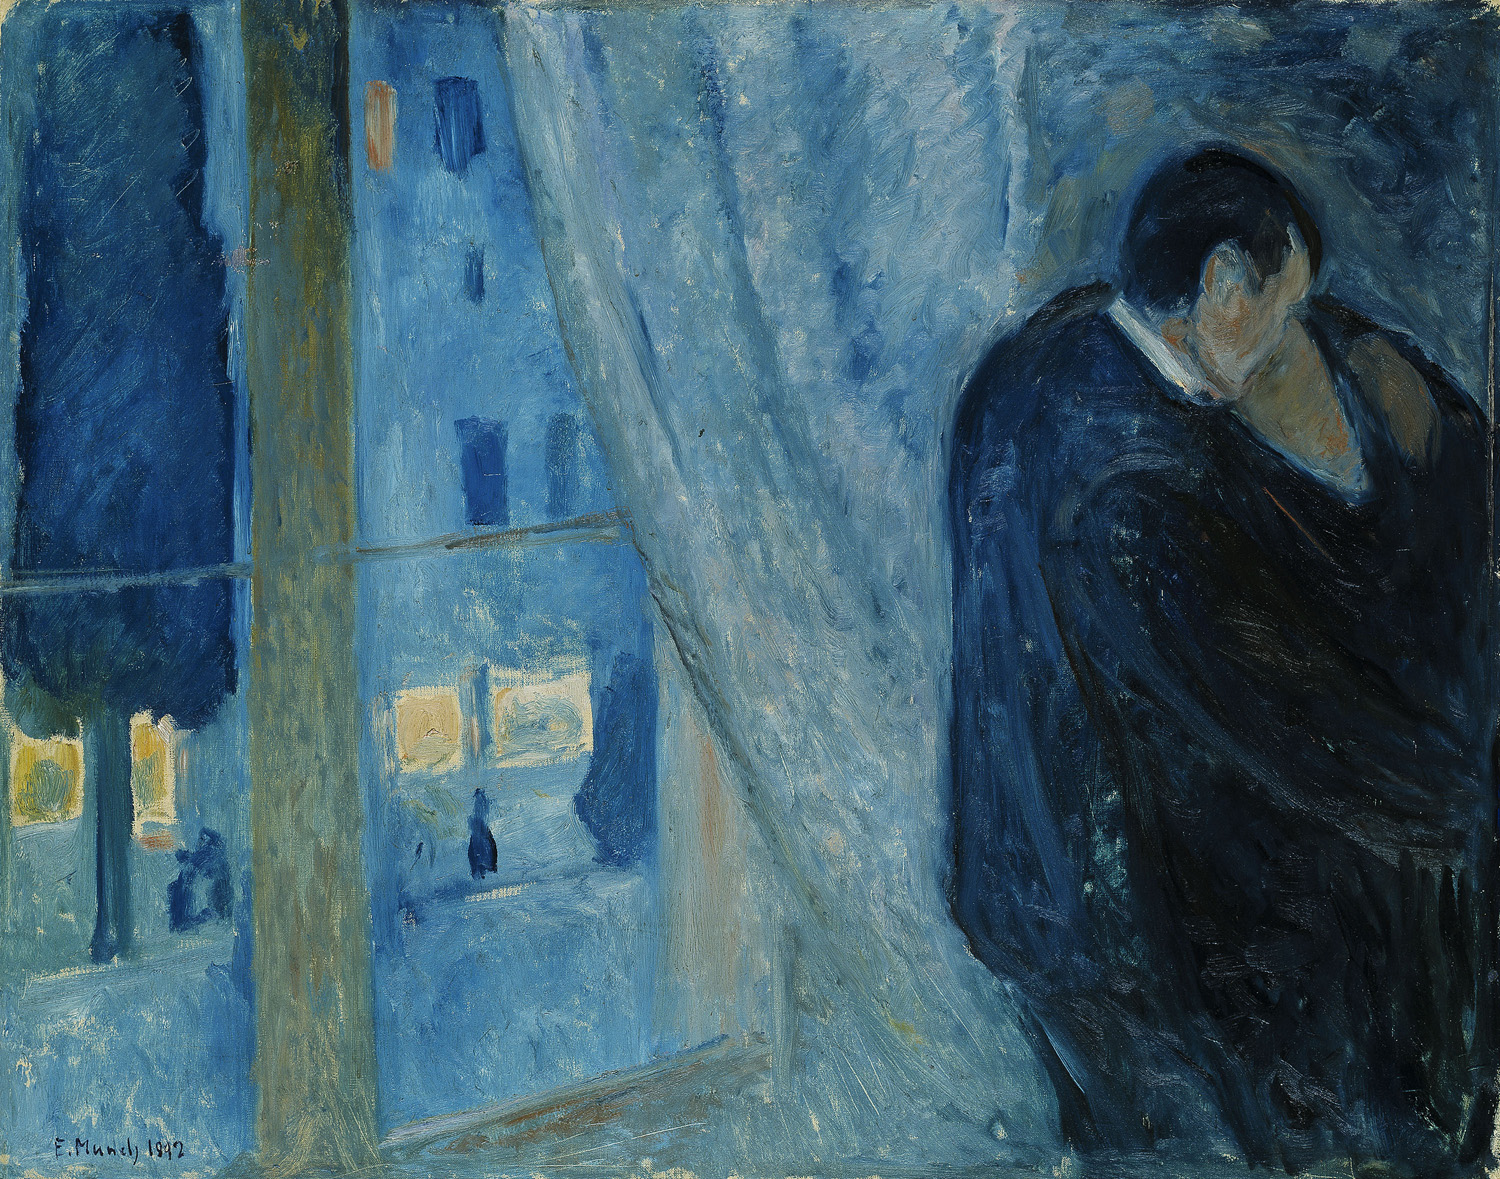 Kiss By The Window by Edvard Munch 1892